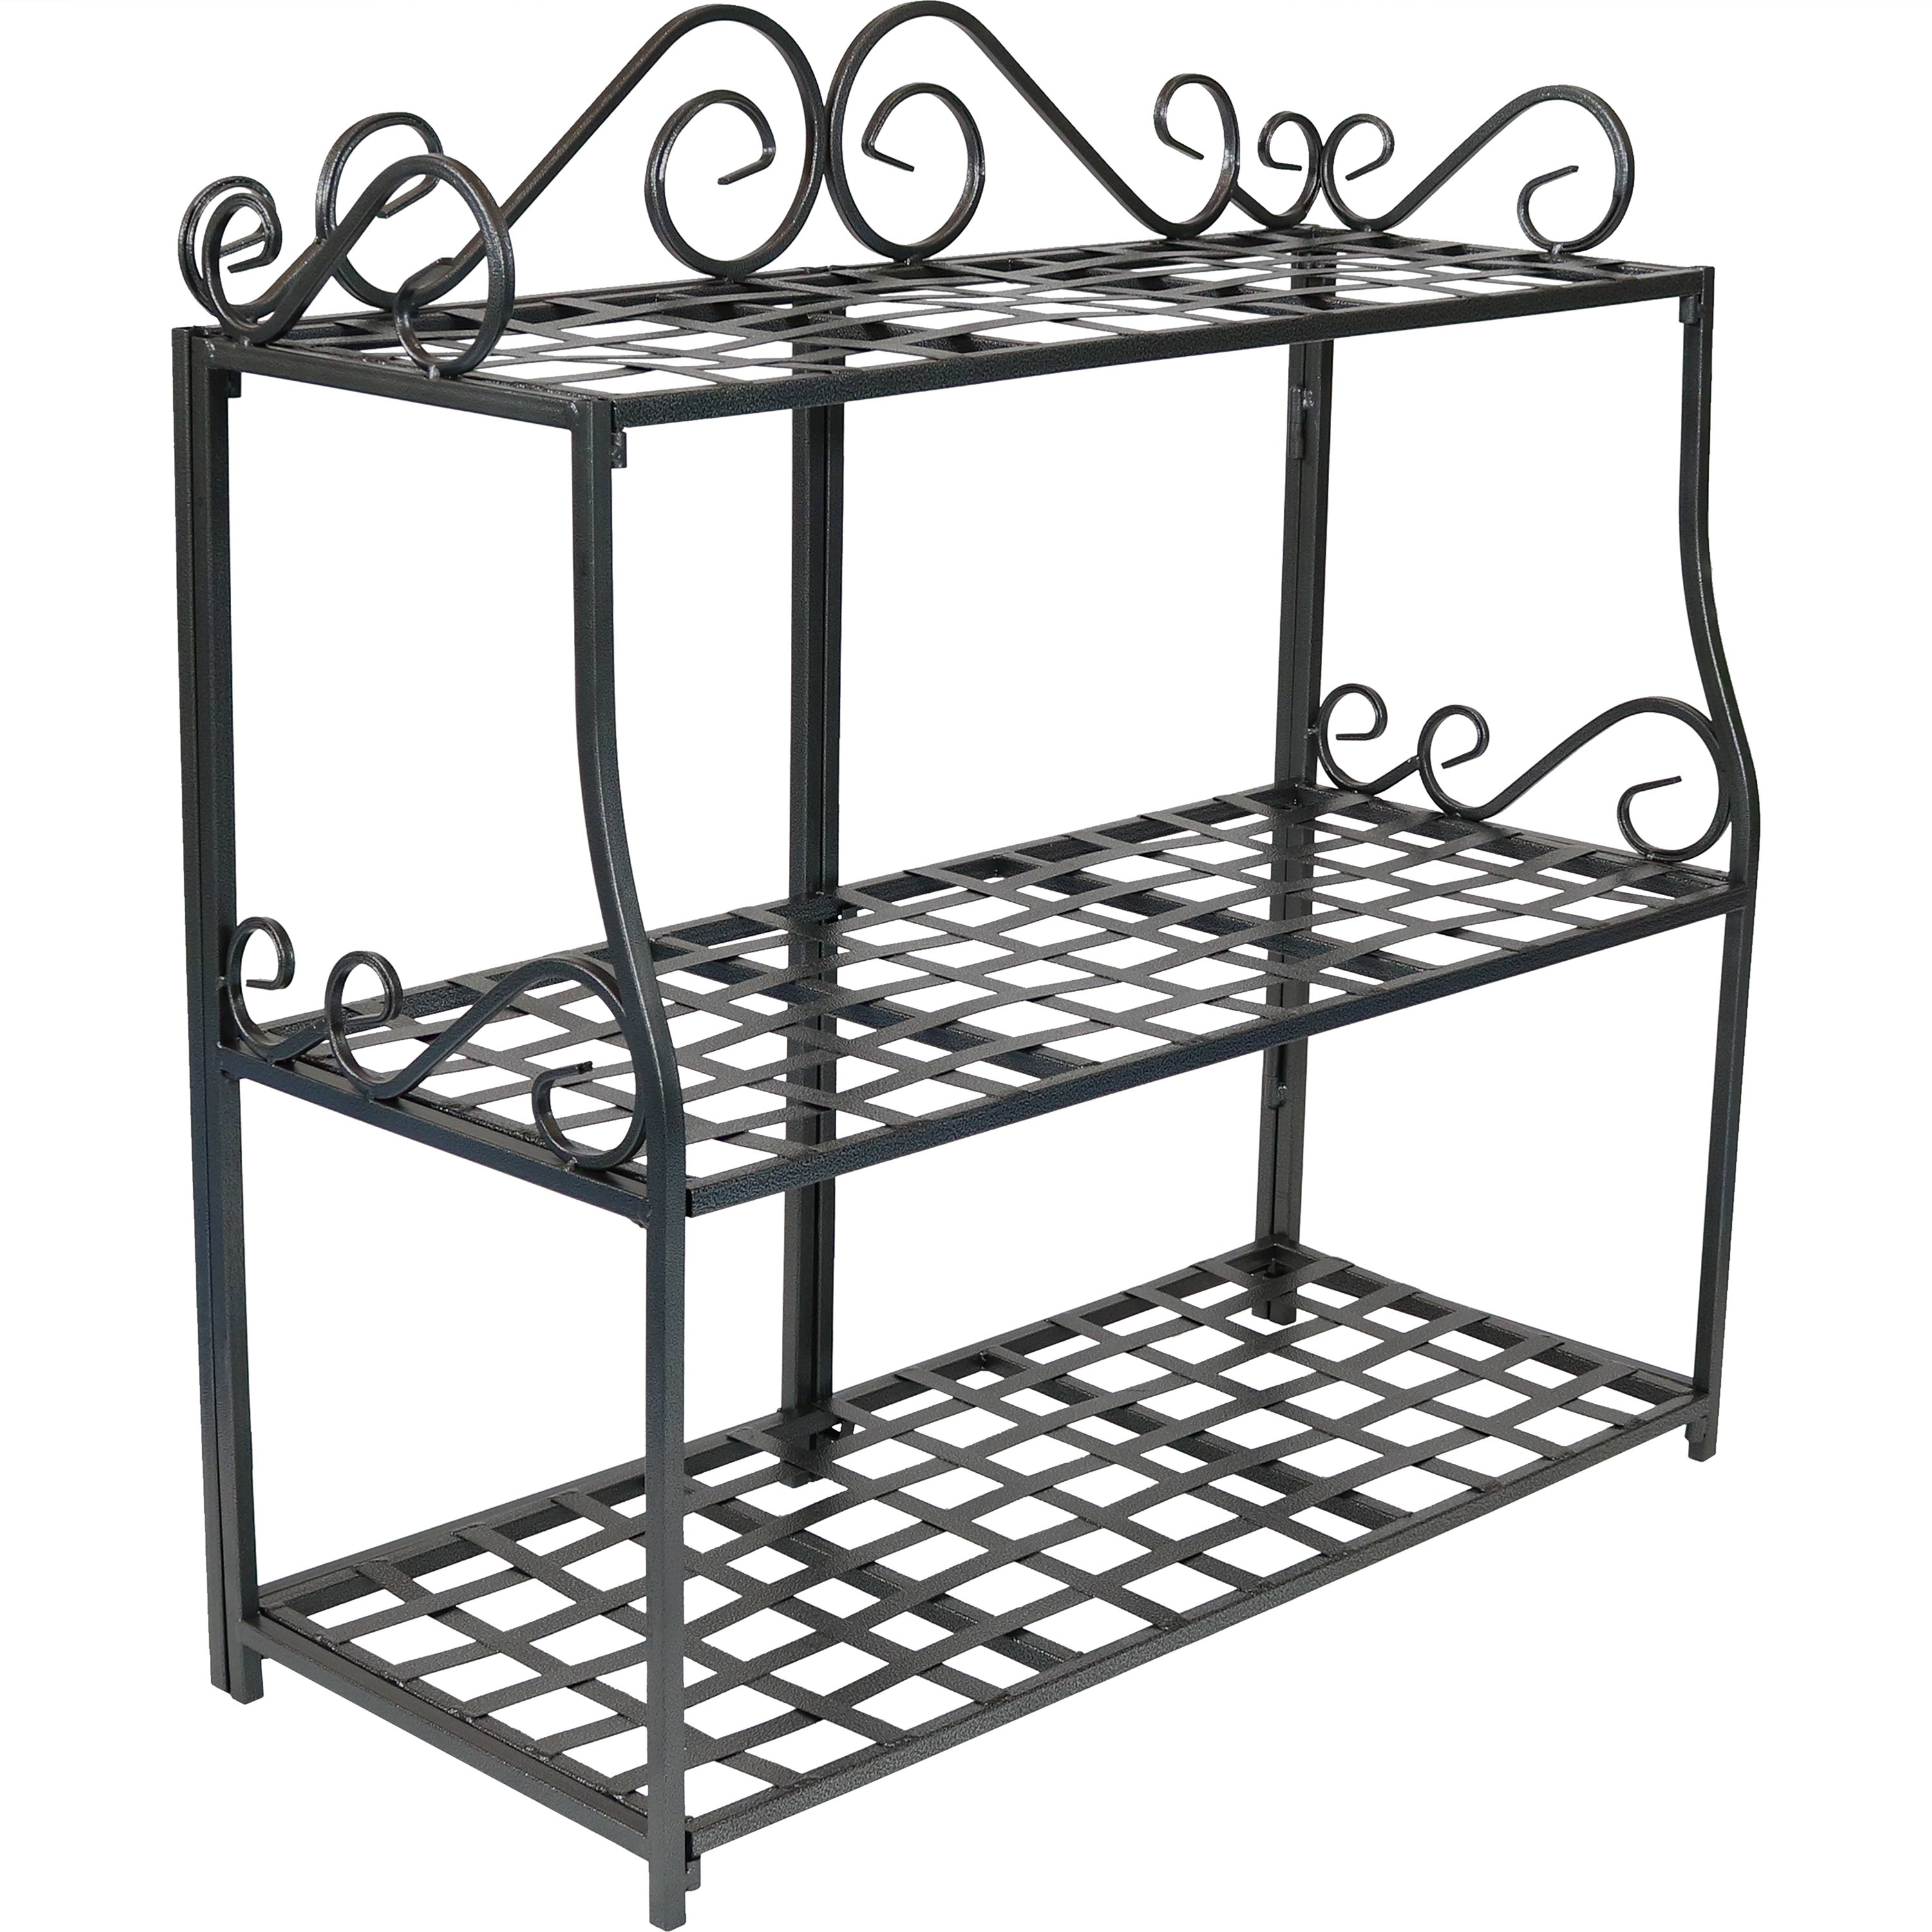 30 in Black Iron 3-Tier Plant Stand Shelf with Scroll Edging